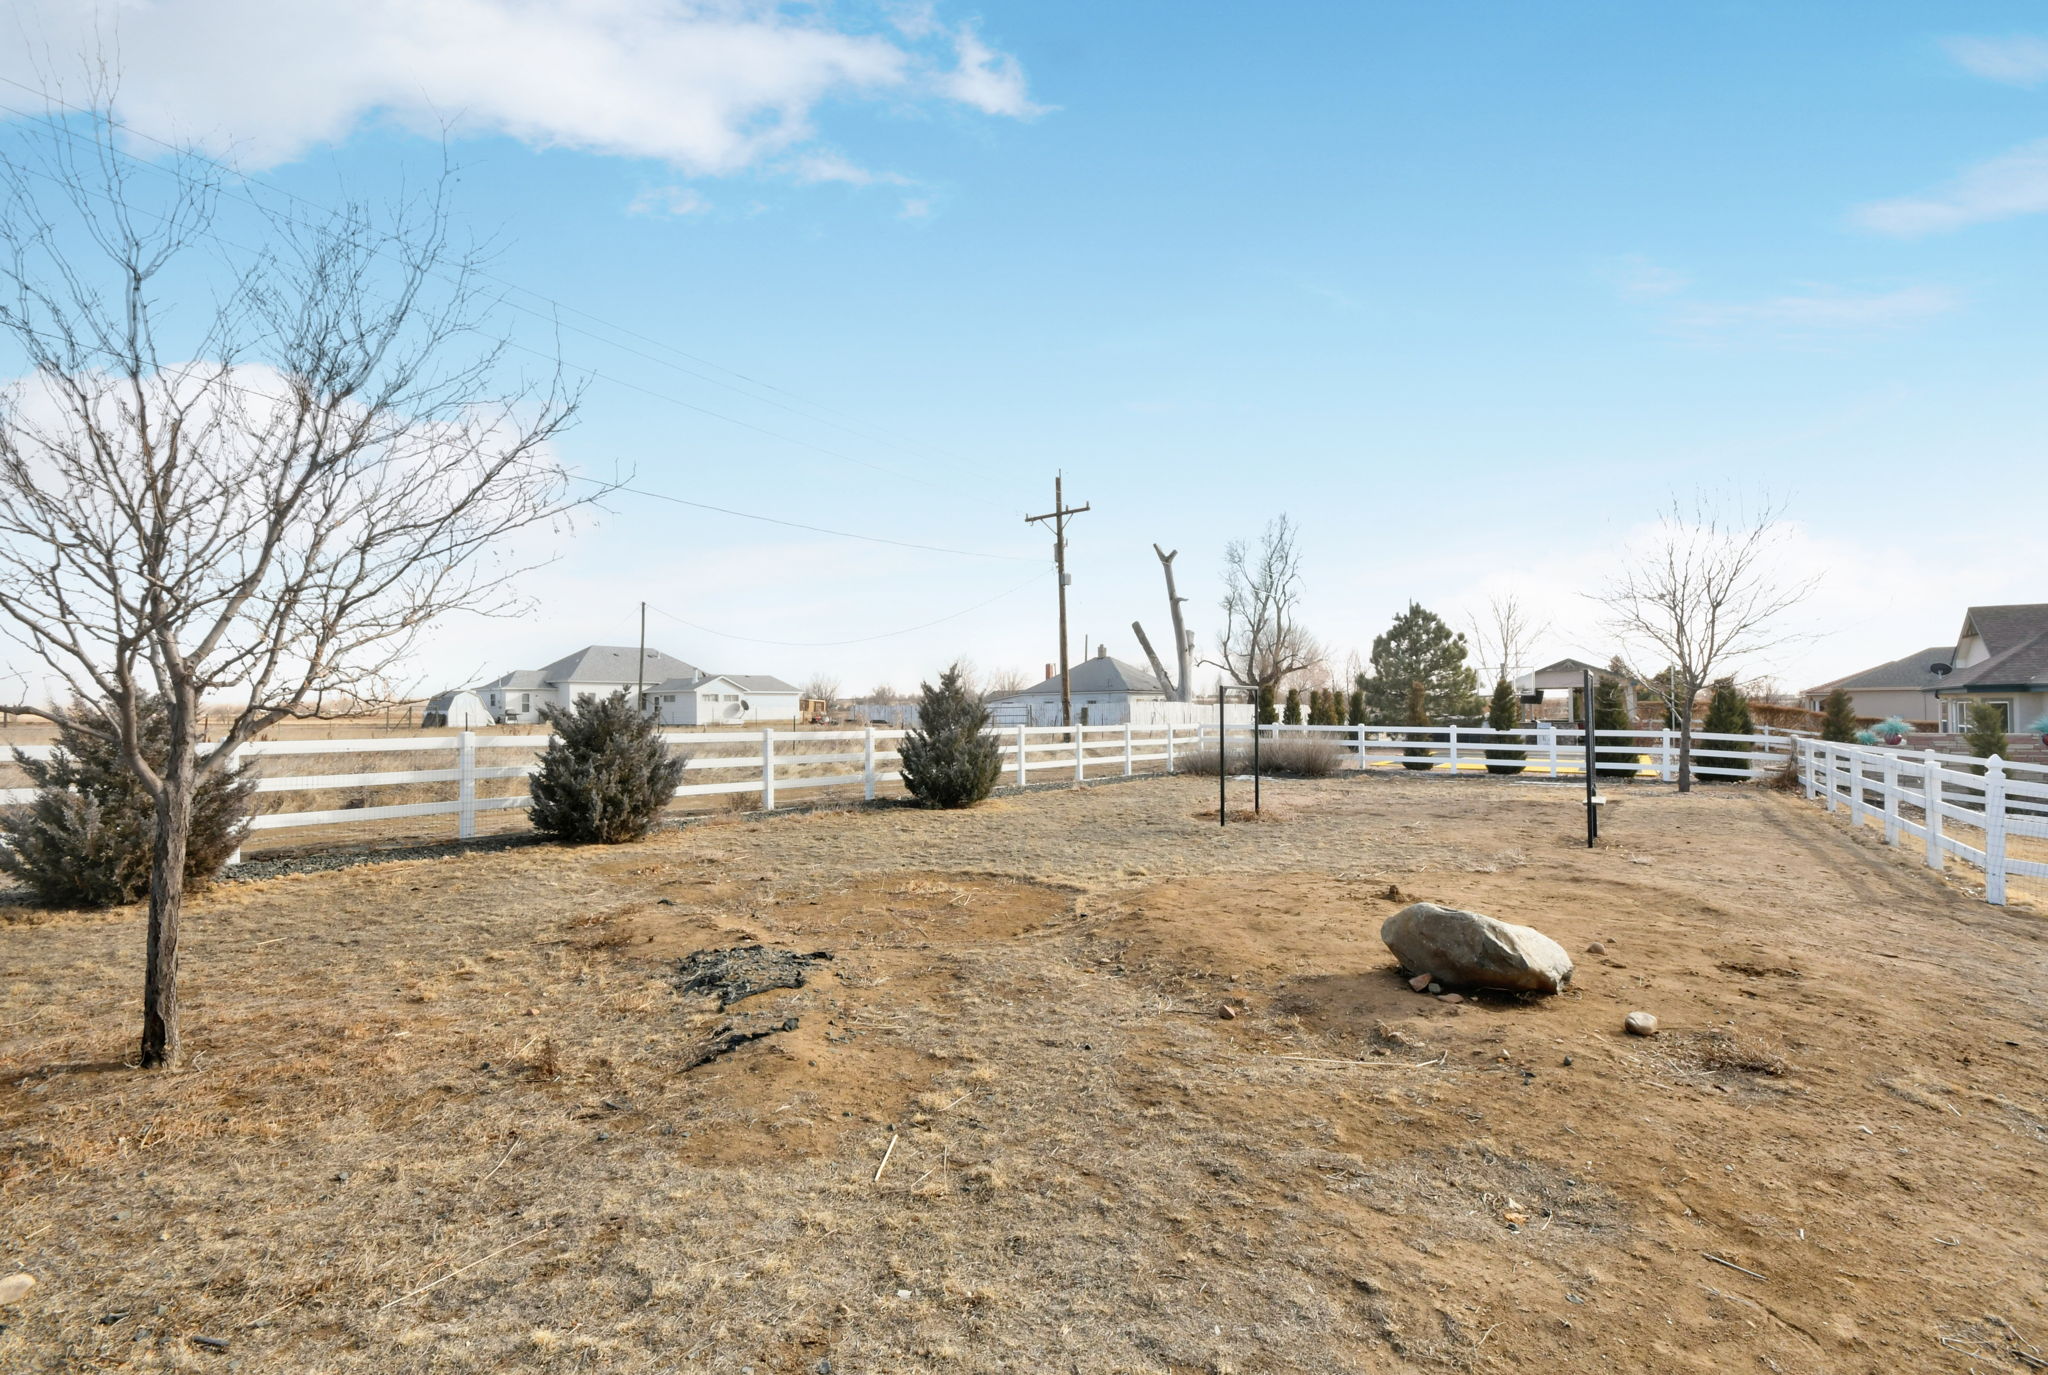  126 S Trail Blazer Rd, Fort Lupton, CO 80621, US Photo 41